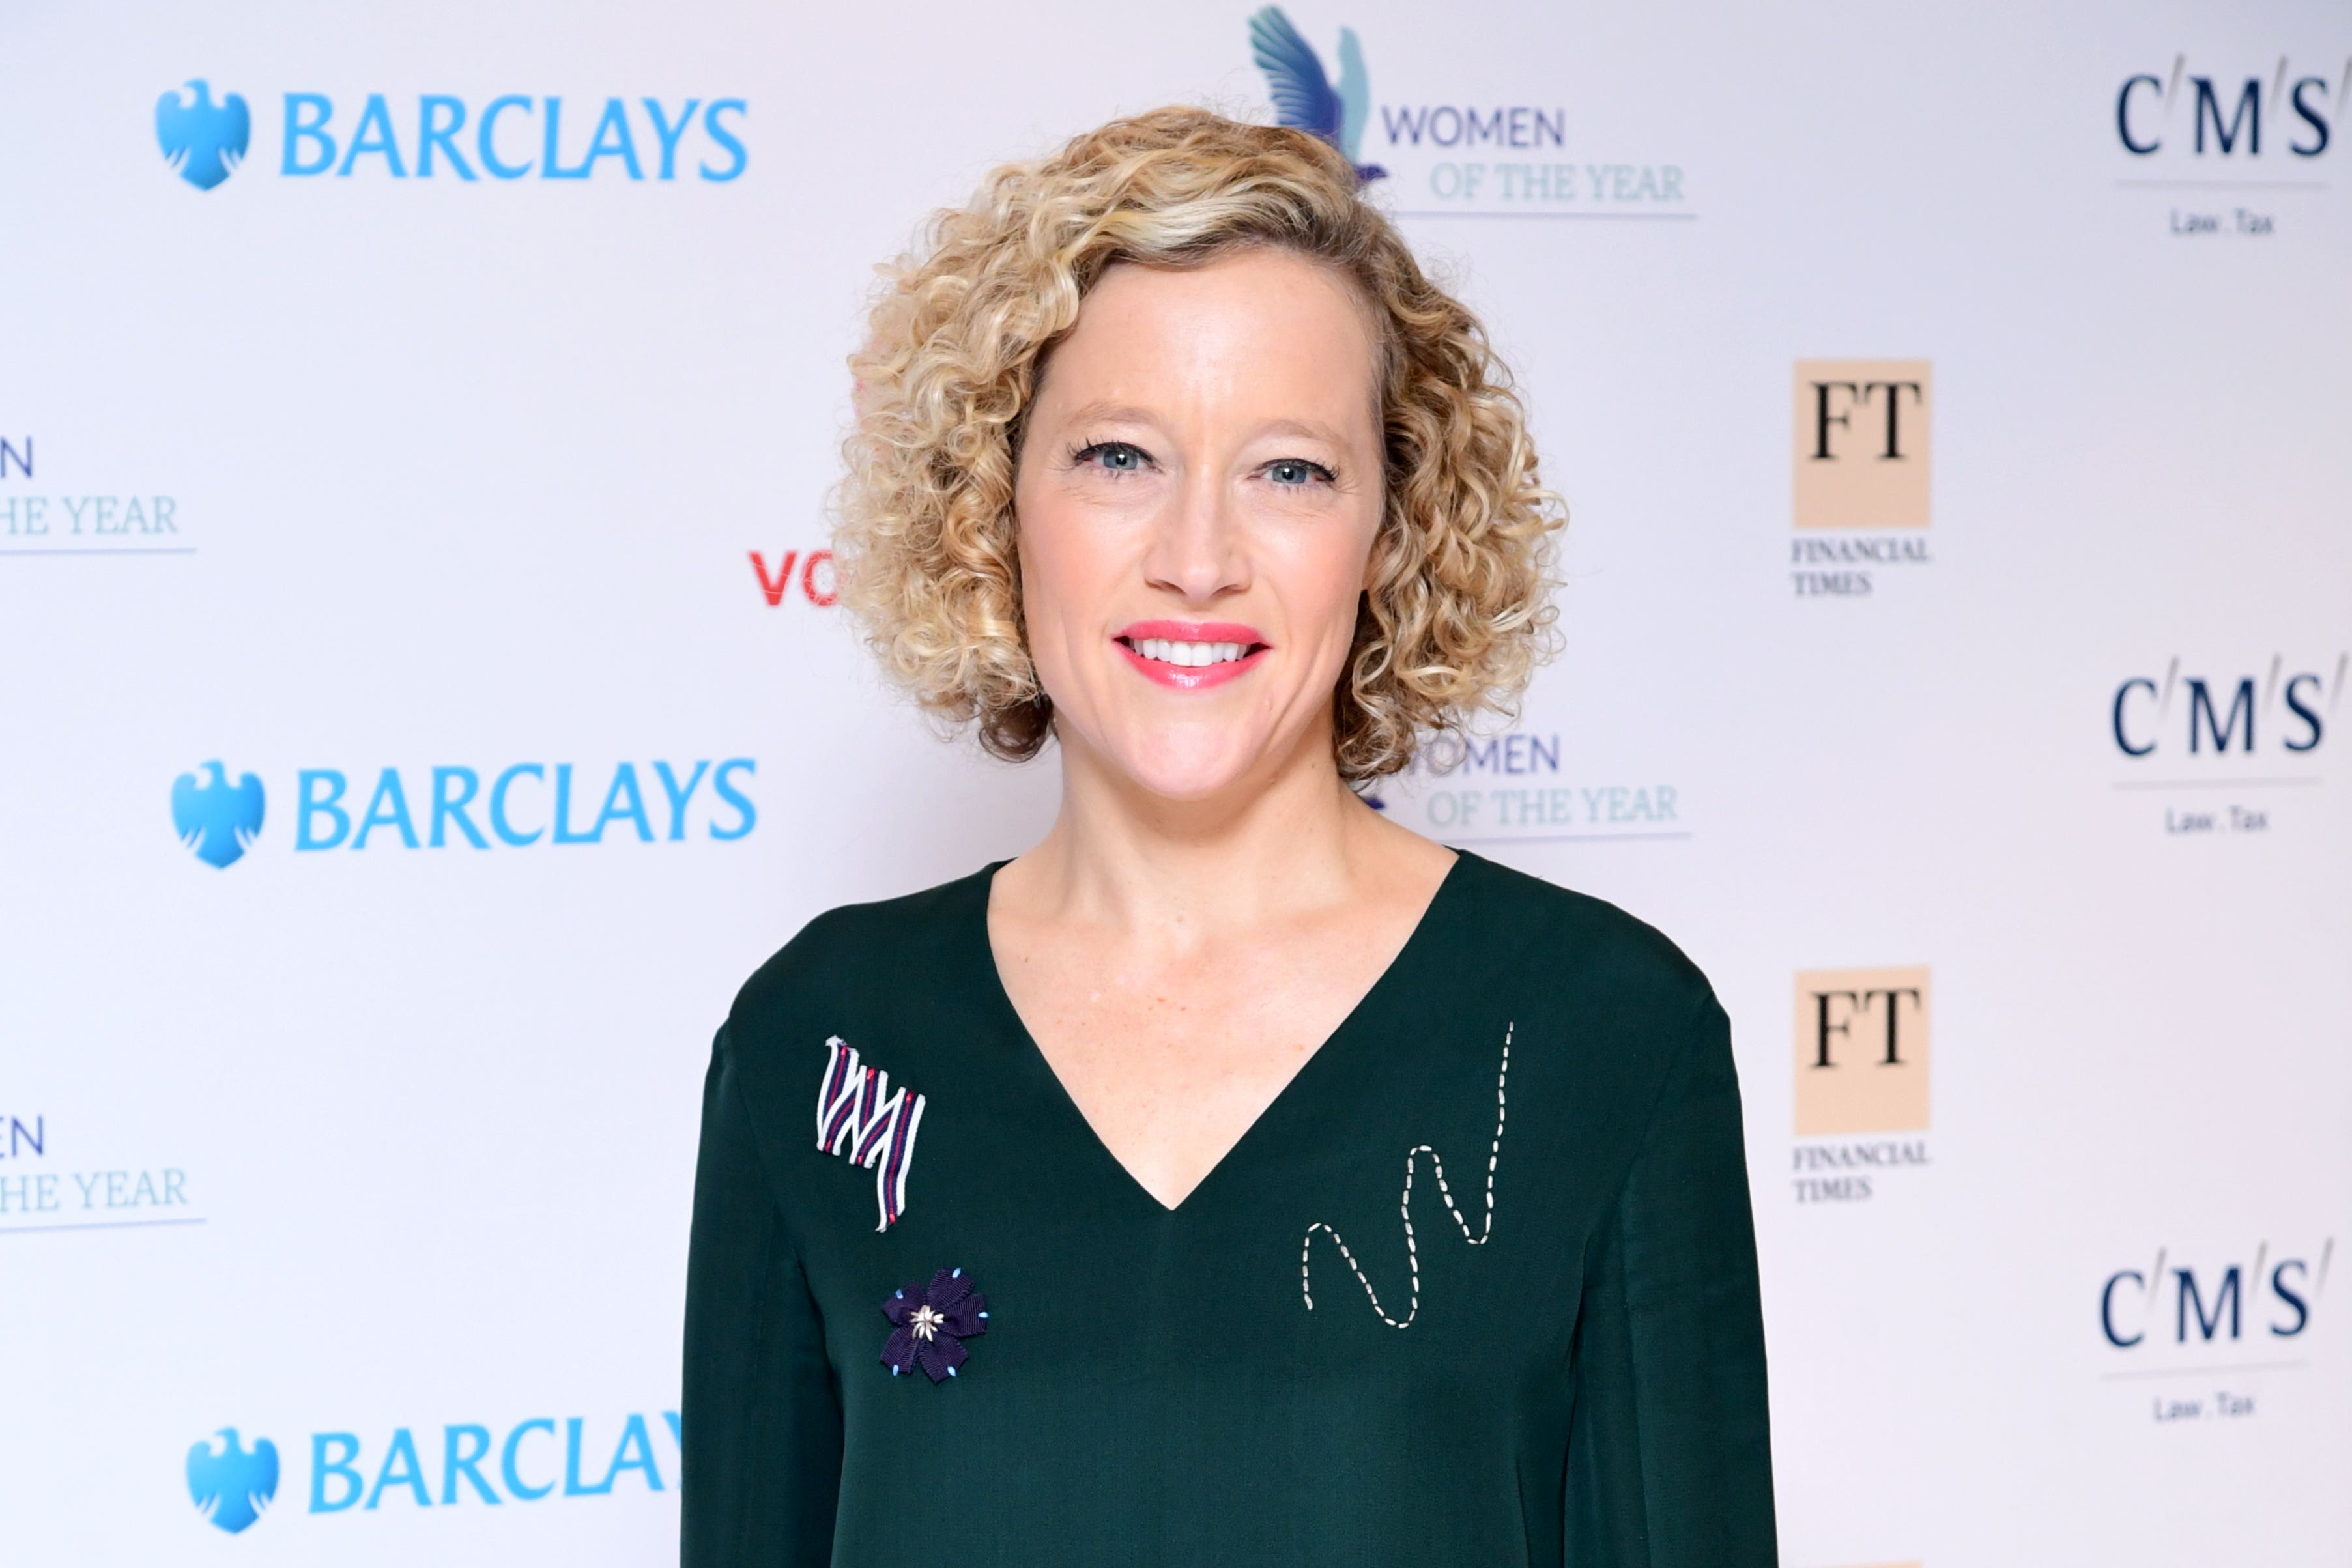 Cathy Newman described her own deepfake as ‘invasive’